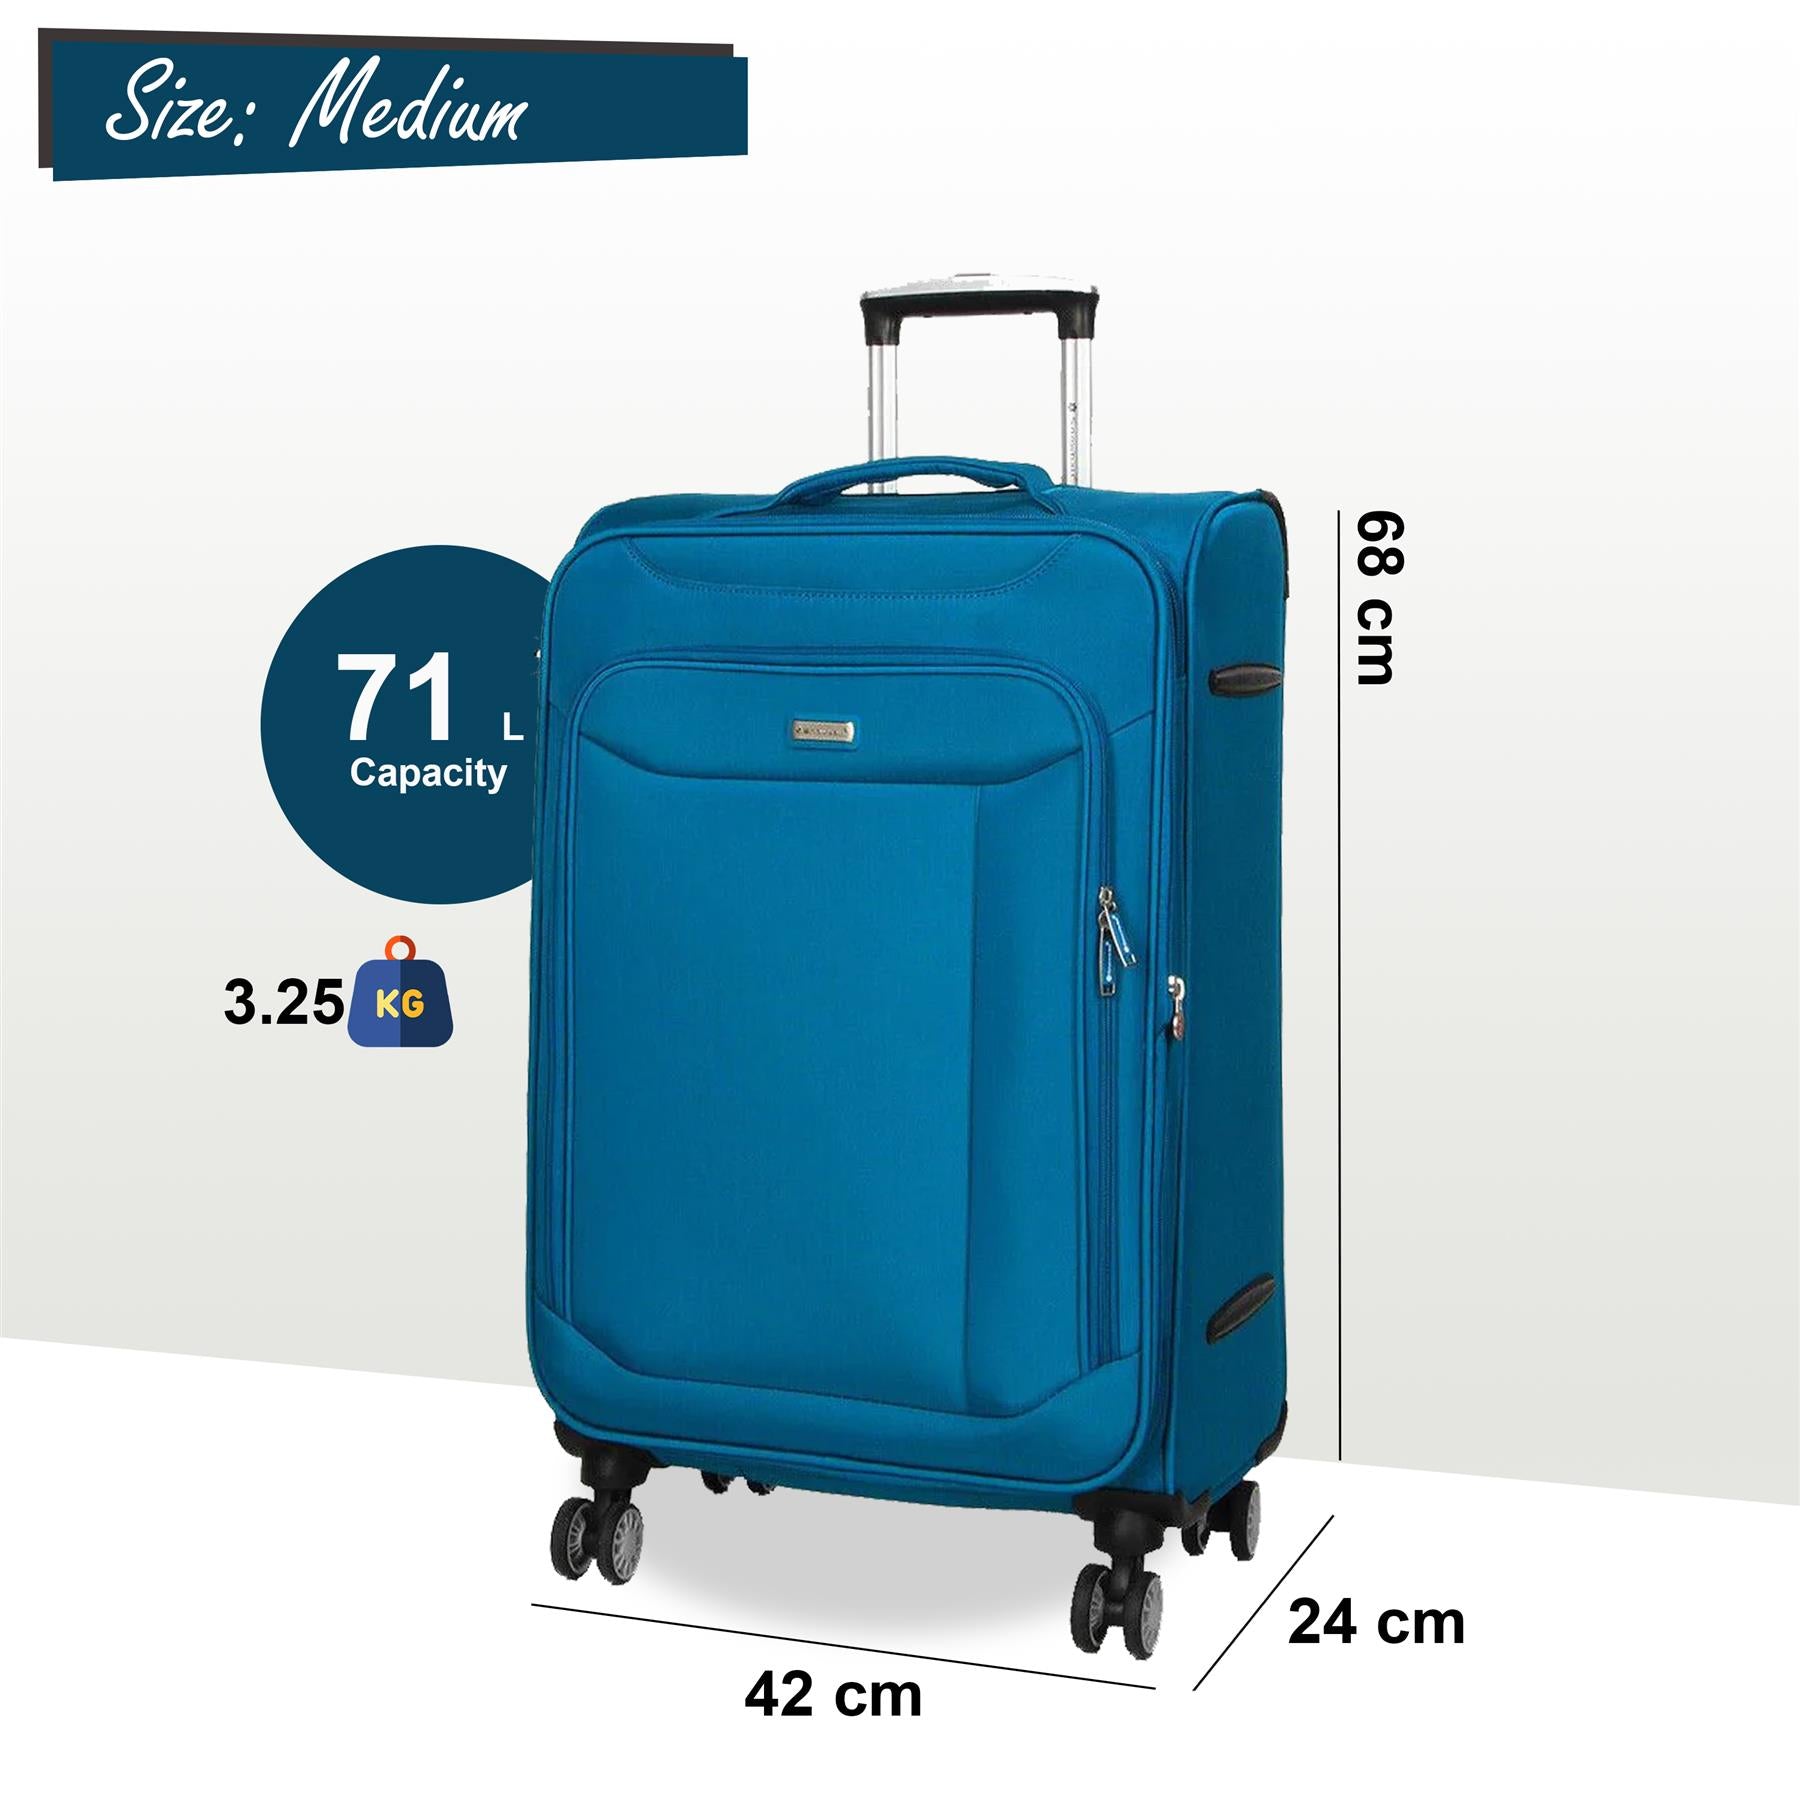 Centreville Medium Soft Shell Suitcase in Teal